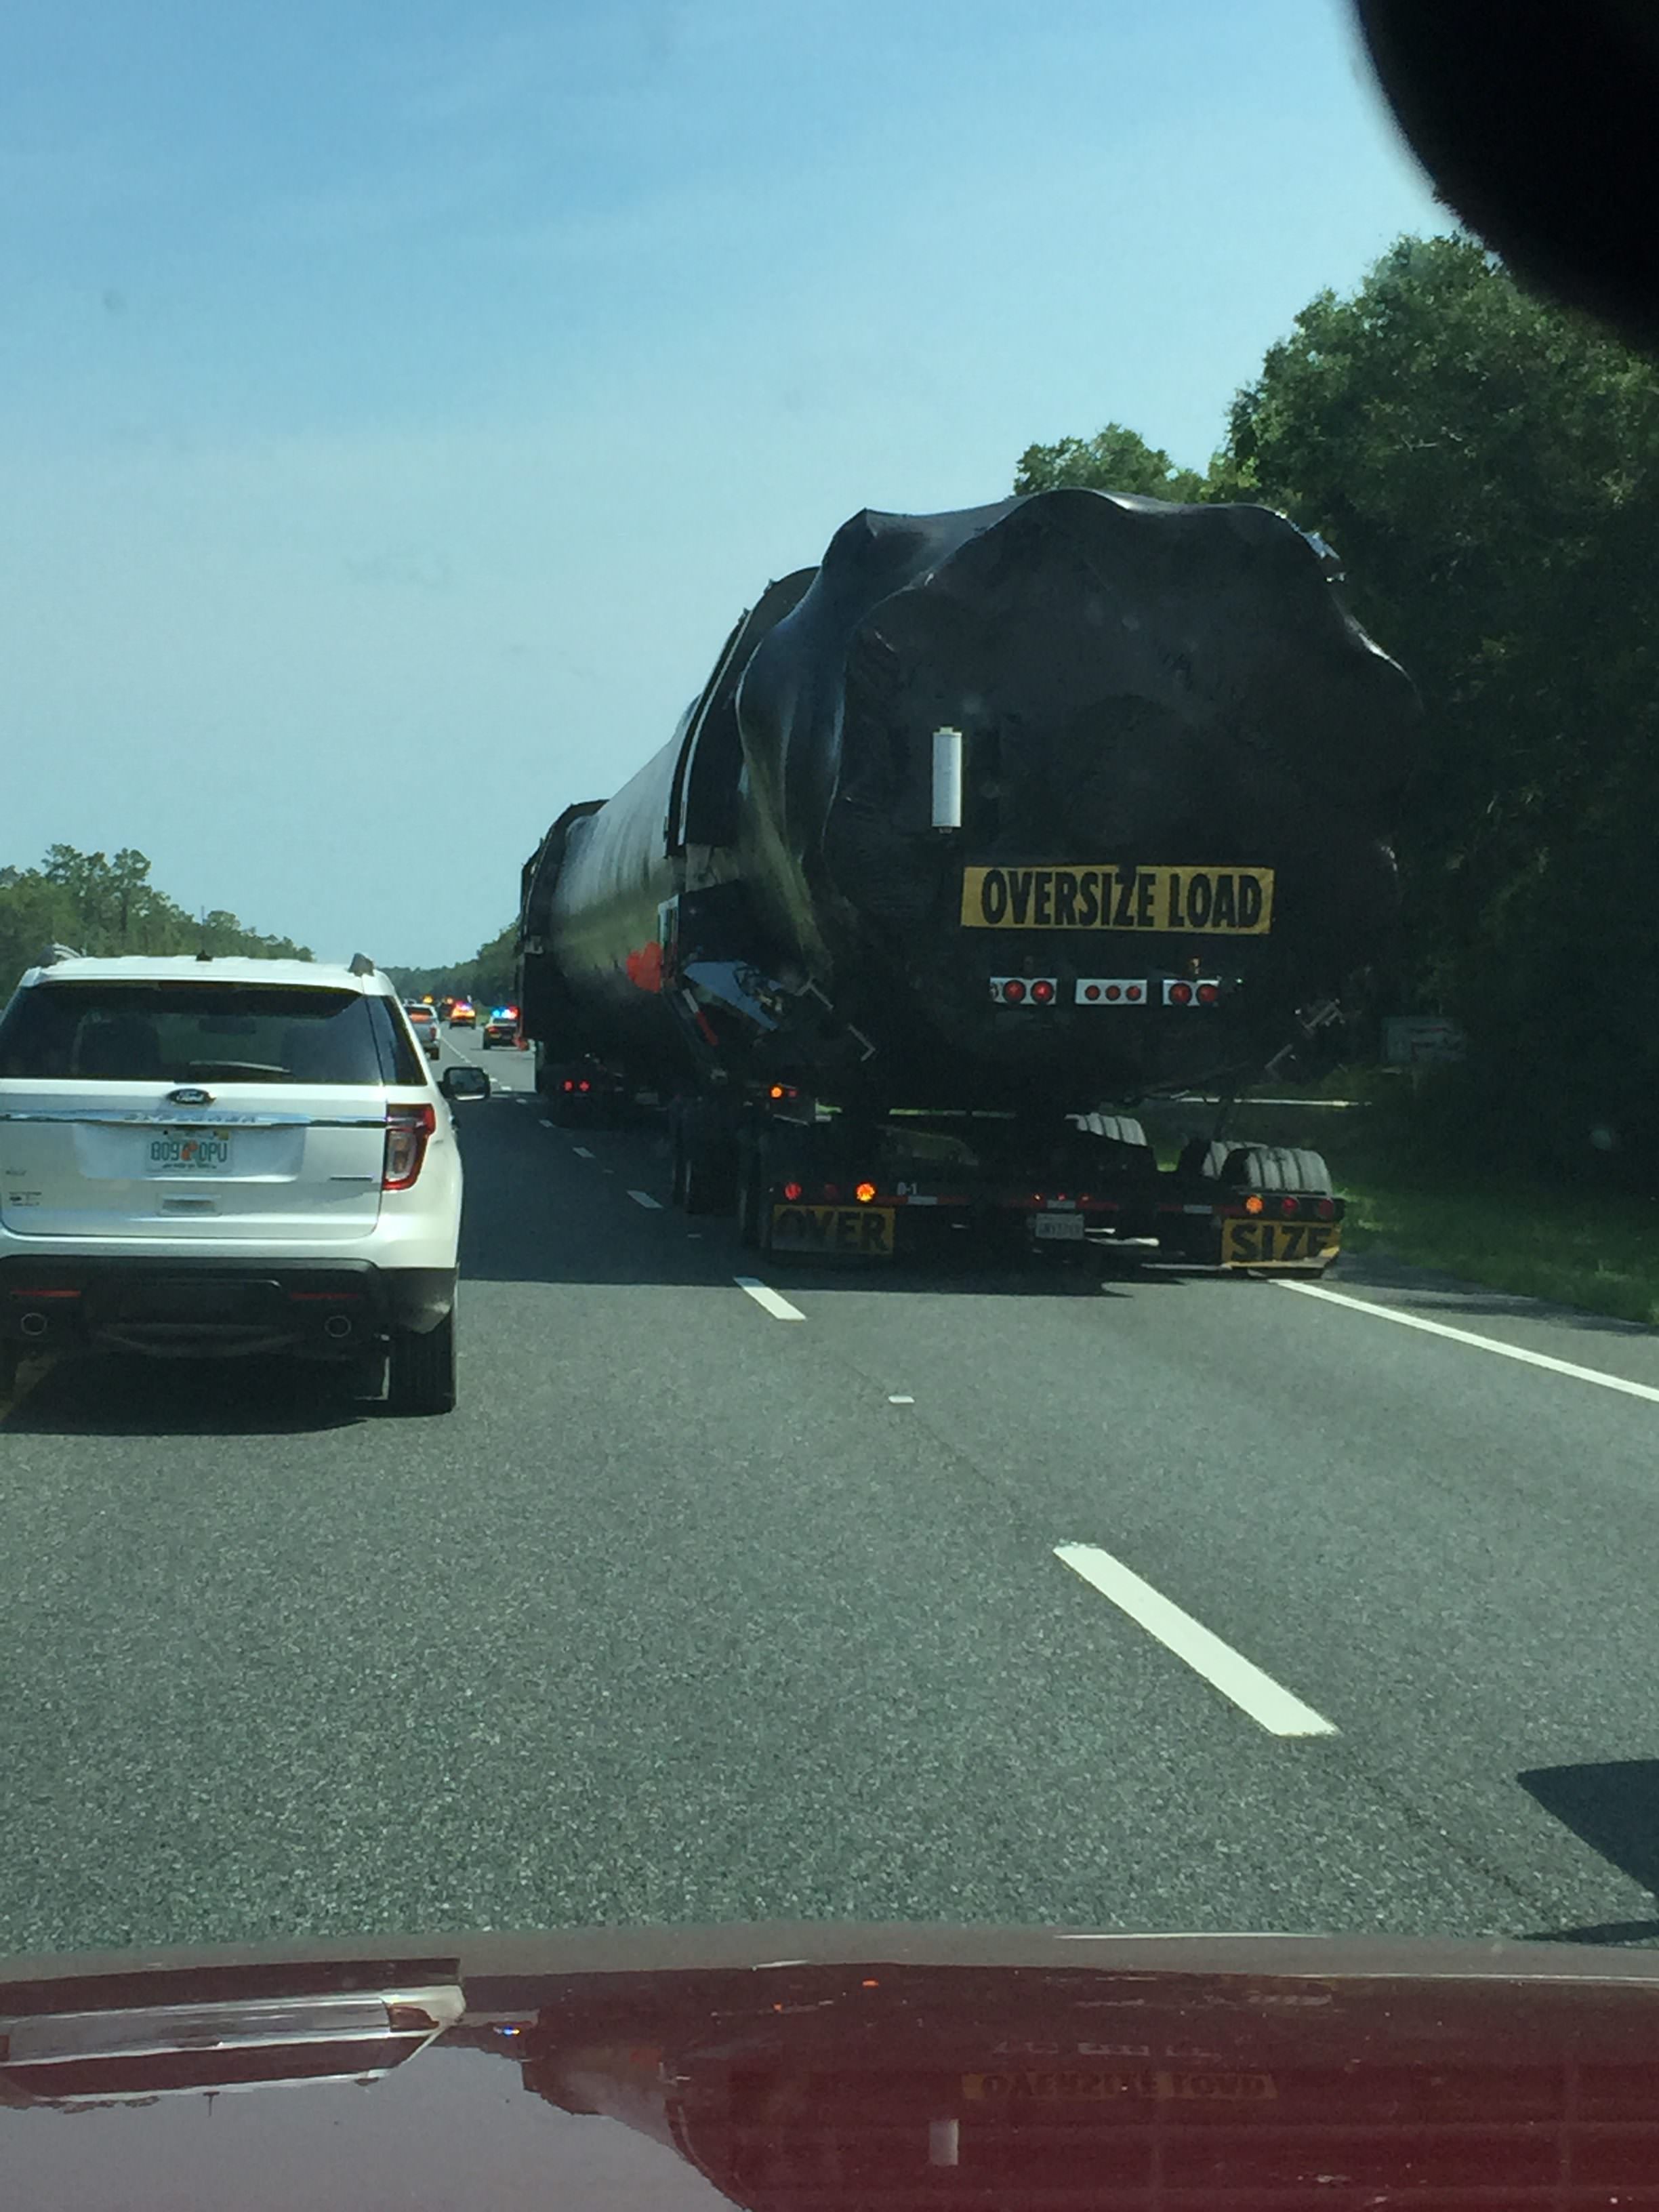 An apparent SpaceX Falcon 9 recovered booster is spotted on US 19 North of Crystal River, Fl on June 13, 2016. Credit: Marie Bieniek